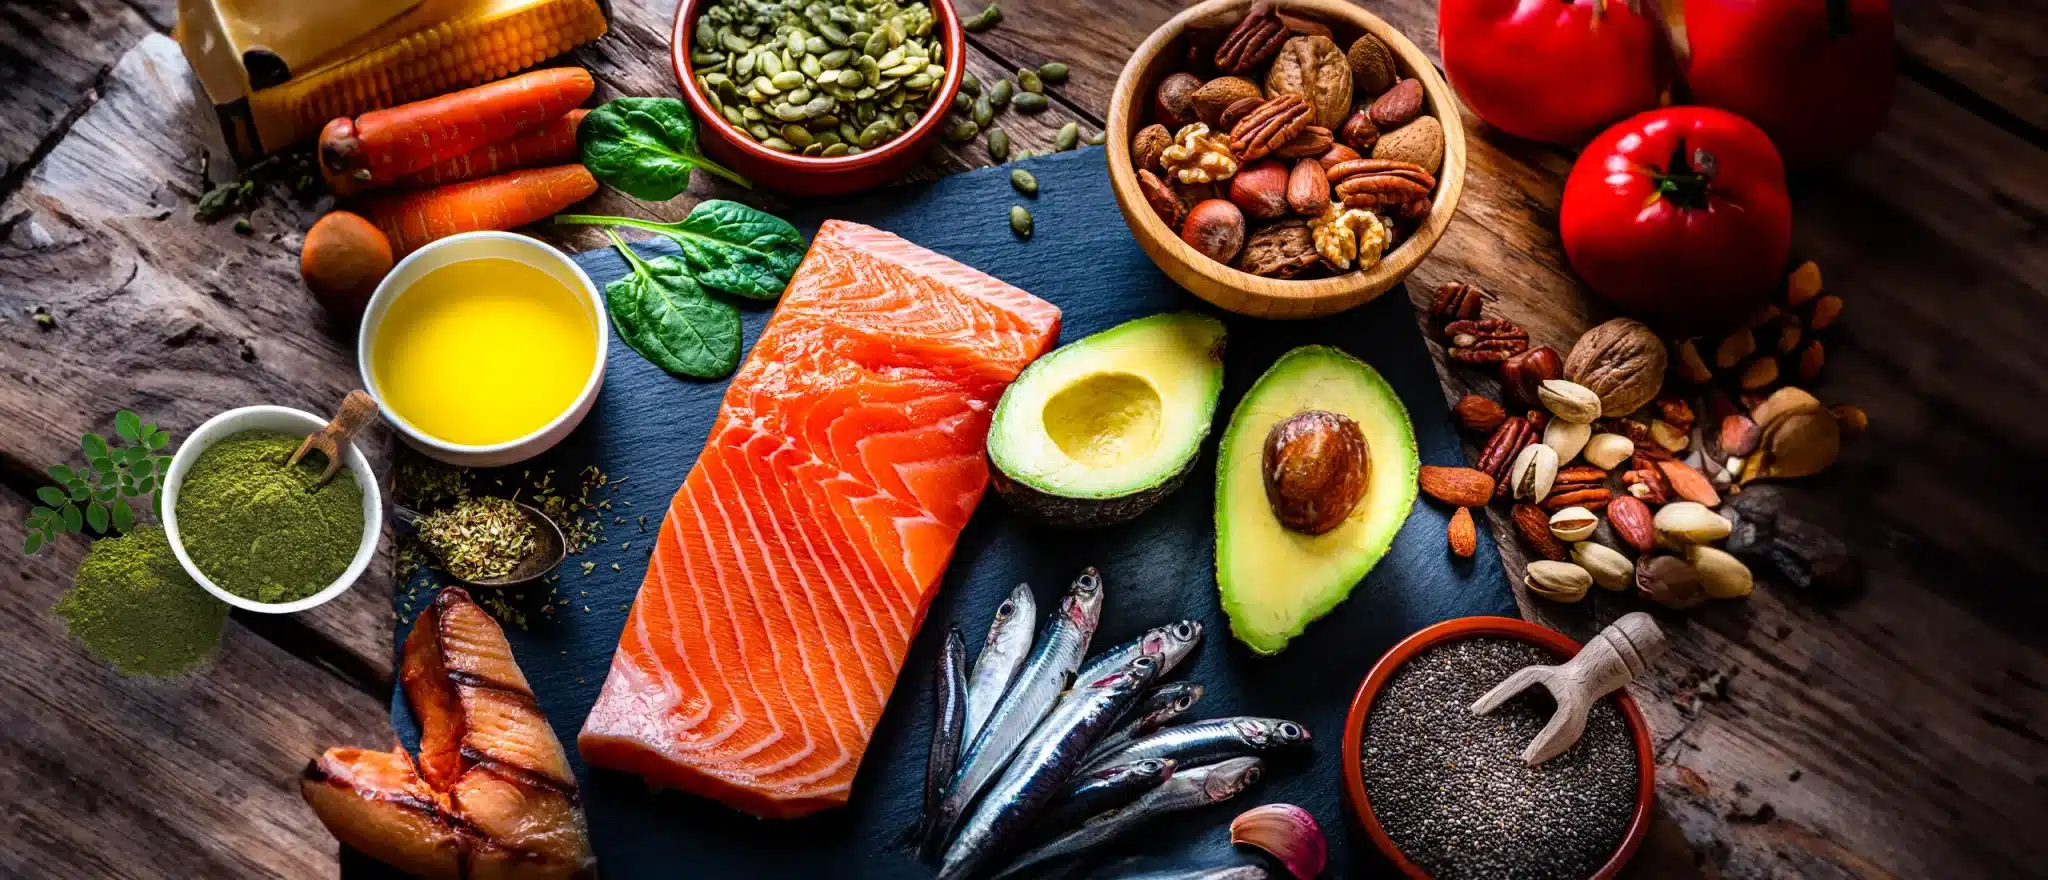 This is the Healthiest Diet You Can Eat, According to a Cardiologist